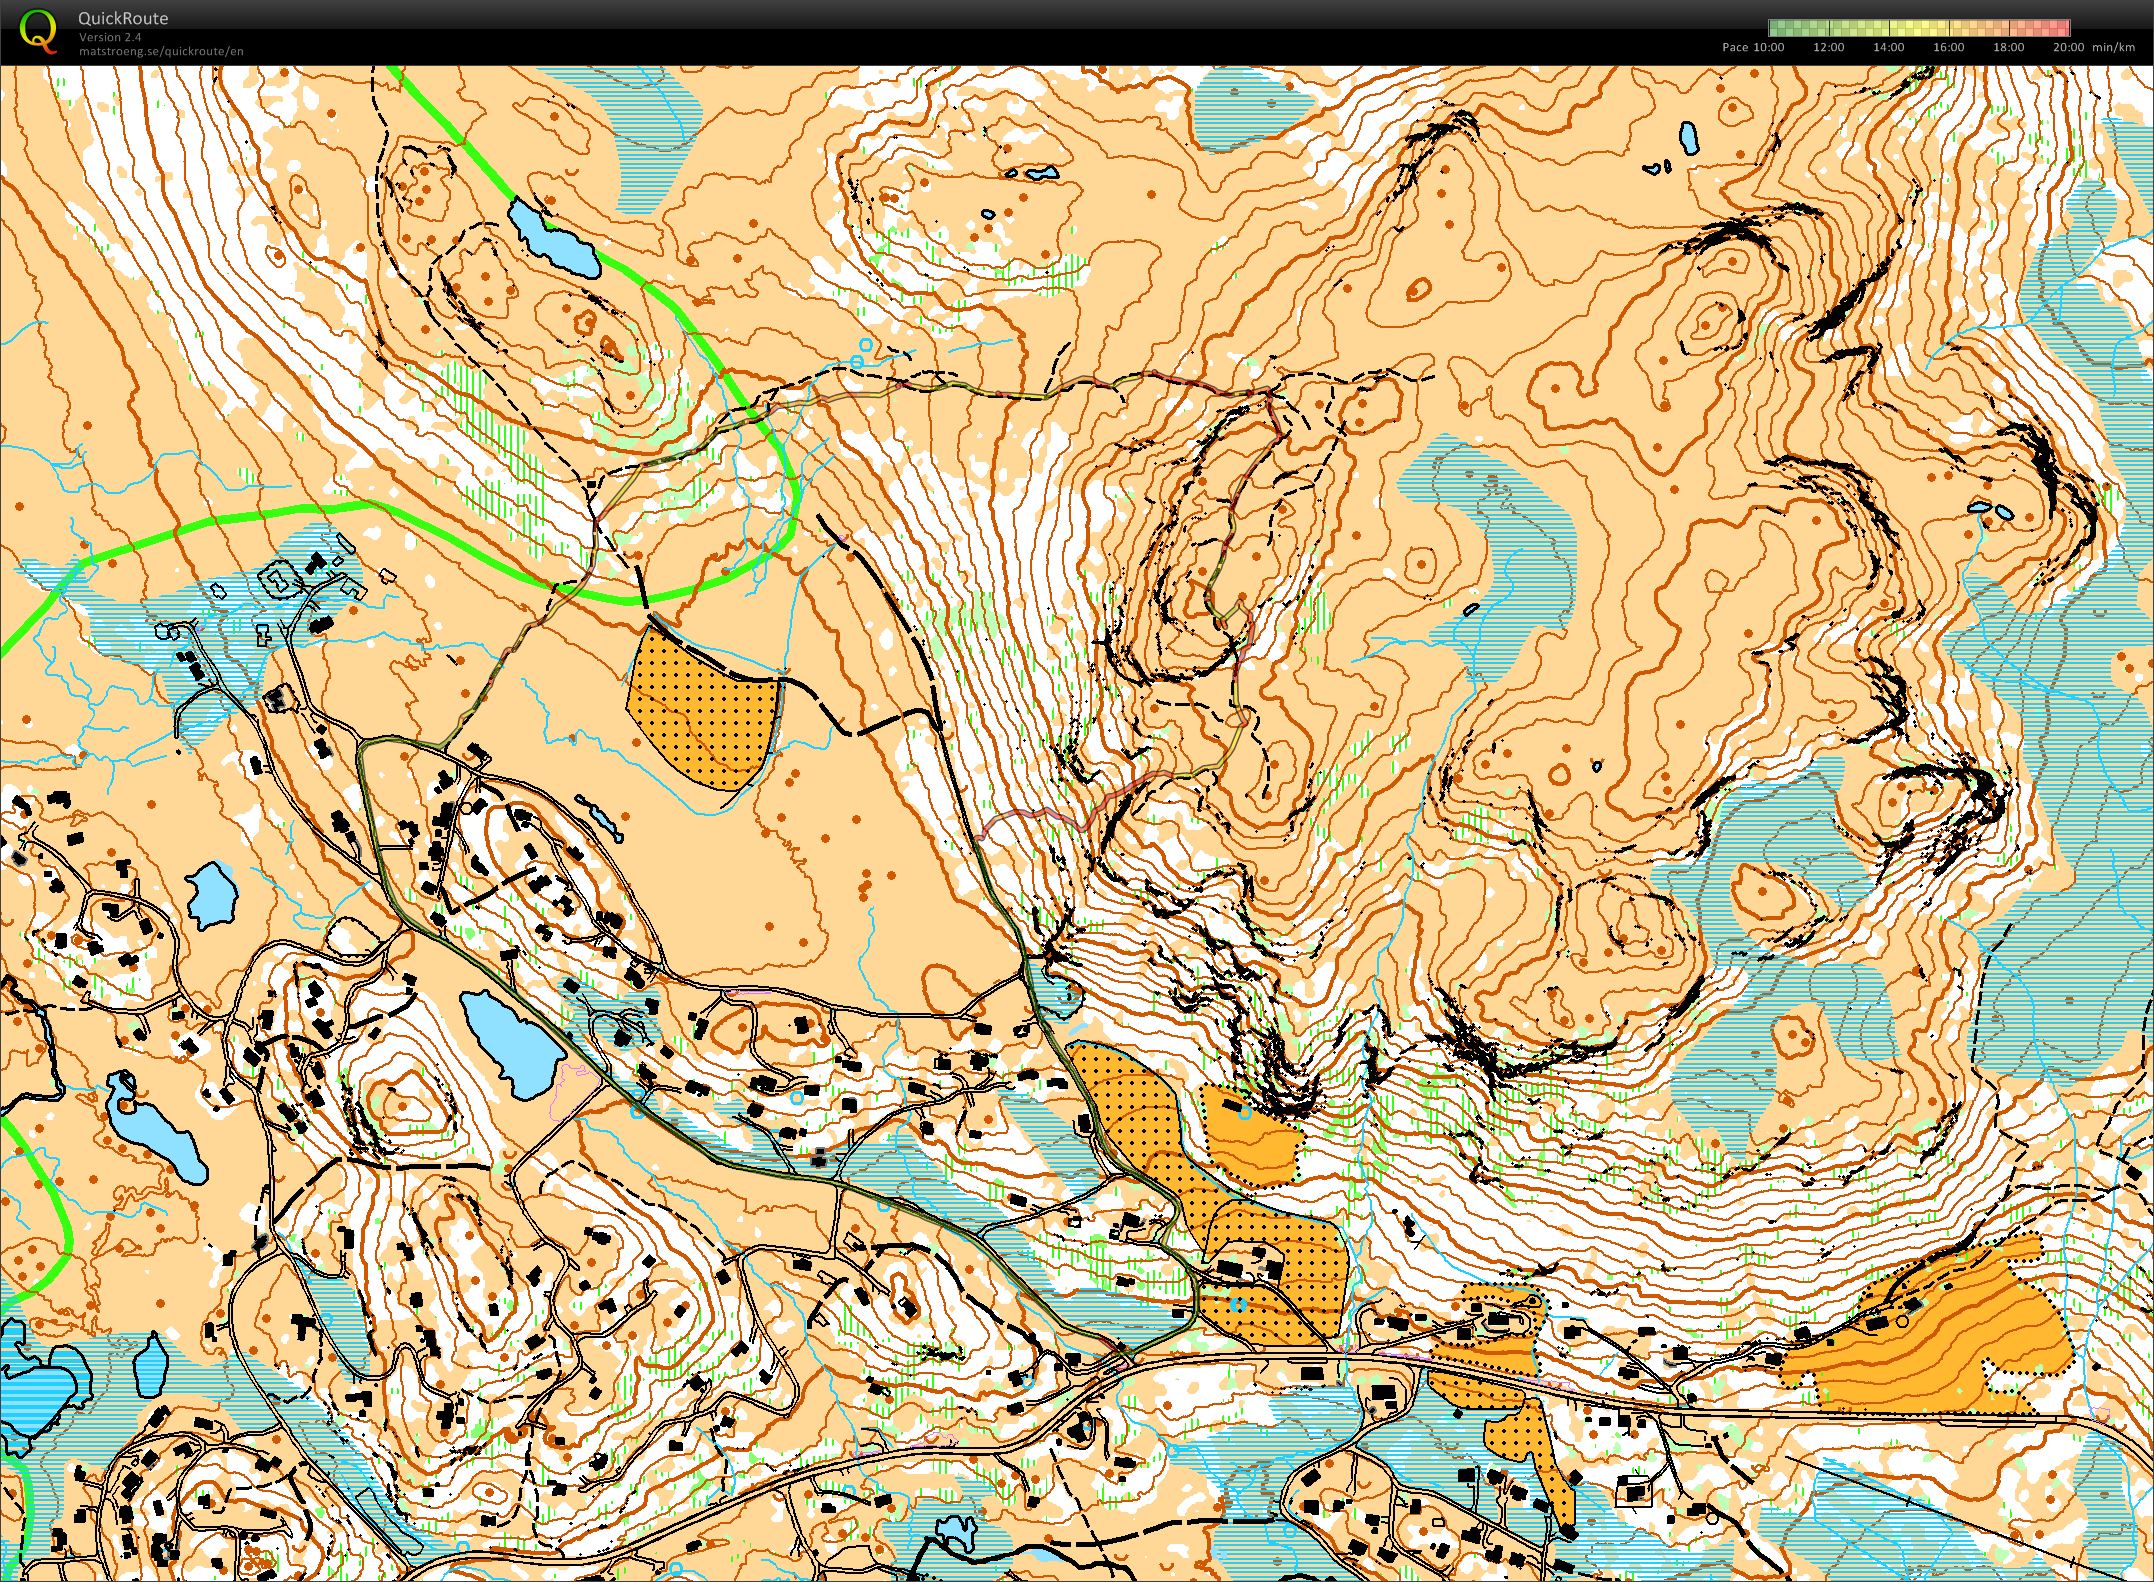 Hiking and checking paths on autogenerated map in Rauland (2014-11-02)